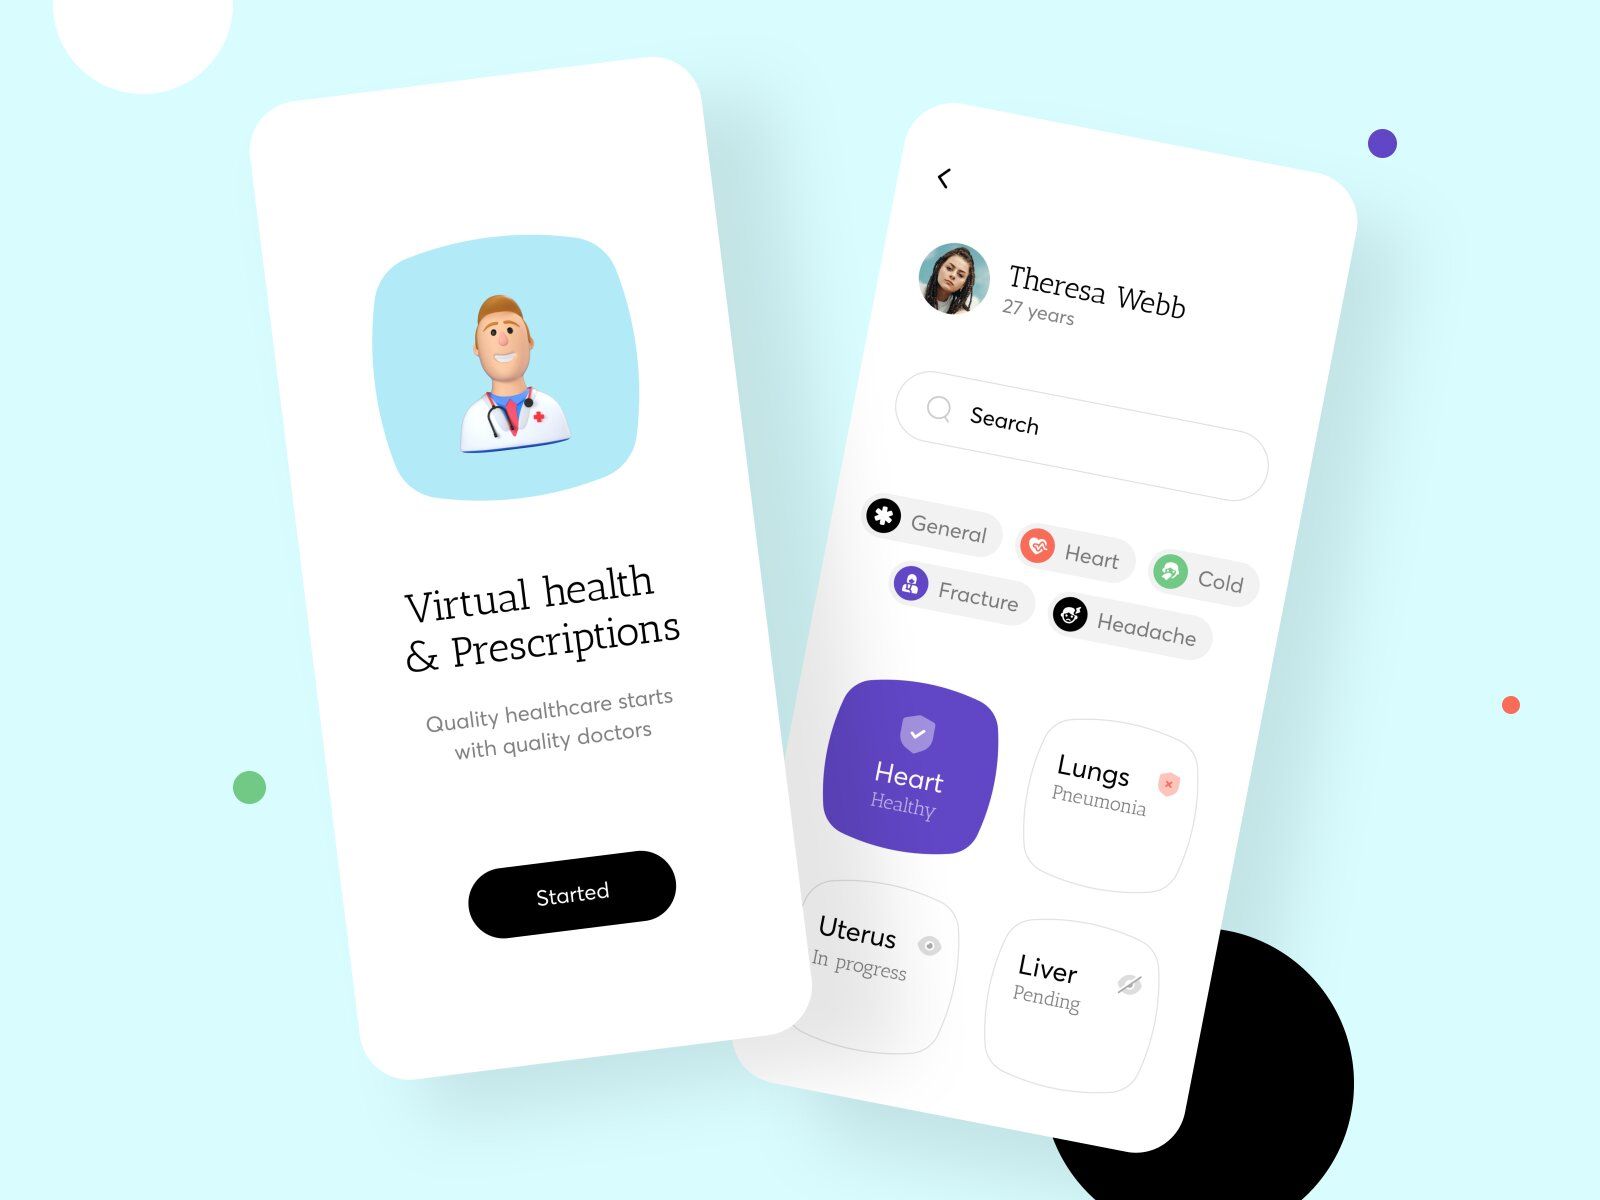 HIPAA is a key regulation to comply with for healthcare providers and businesses (*image by [Baten ](https://dribbble.com/batzs){ rel="nofollow" .default-md}*)